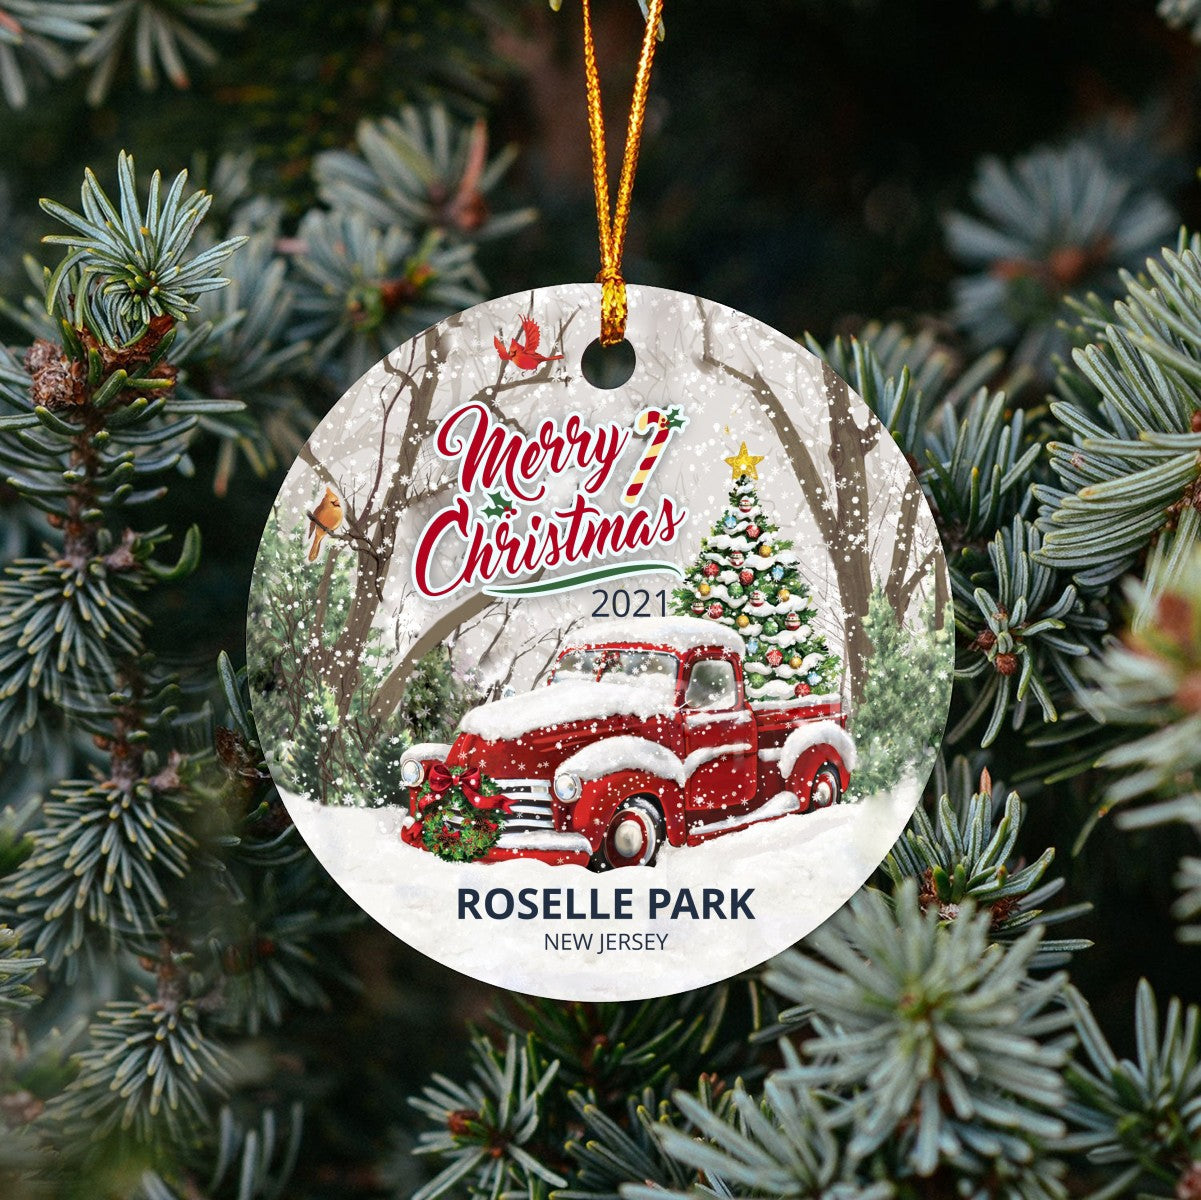 Christmas Tree Ornaments Roselle Park - Ornament With Name City, State Roselle Park New Jersey NJ Ornament - Red Truck Xmas Ornaments 3'' Plastic Gift For Family, Friend And Housewarming